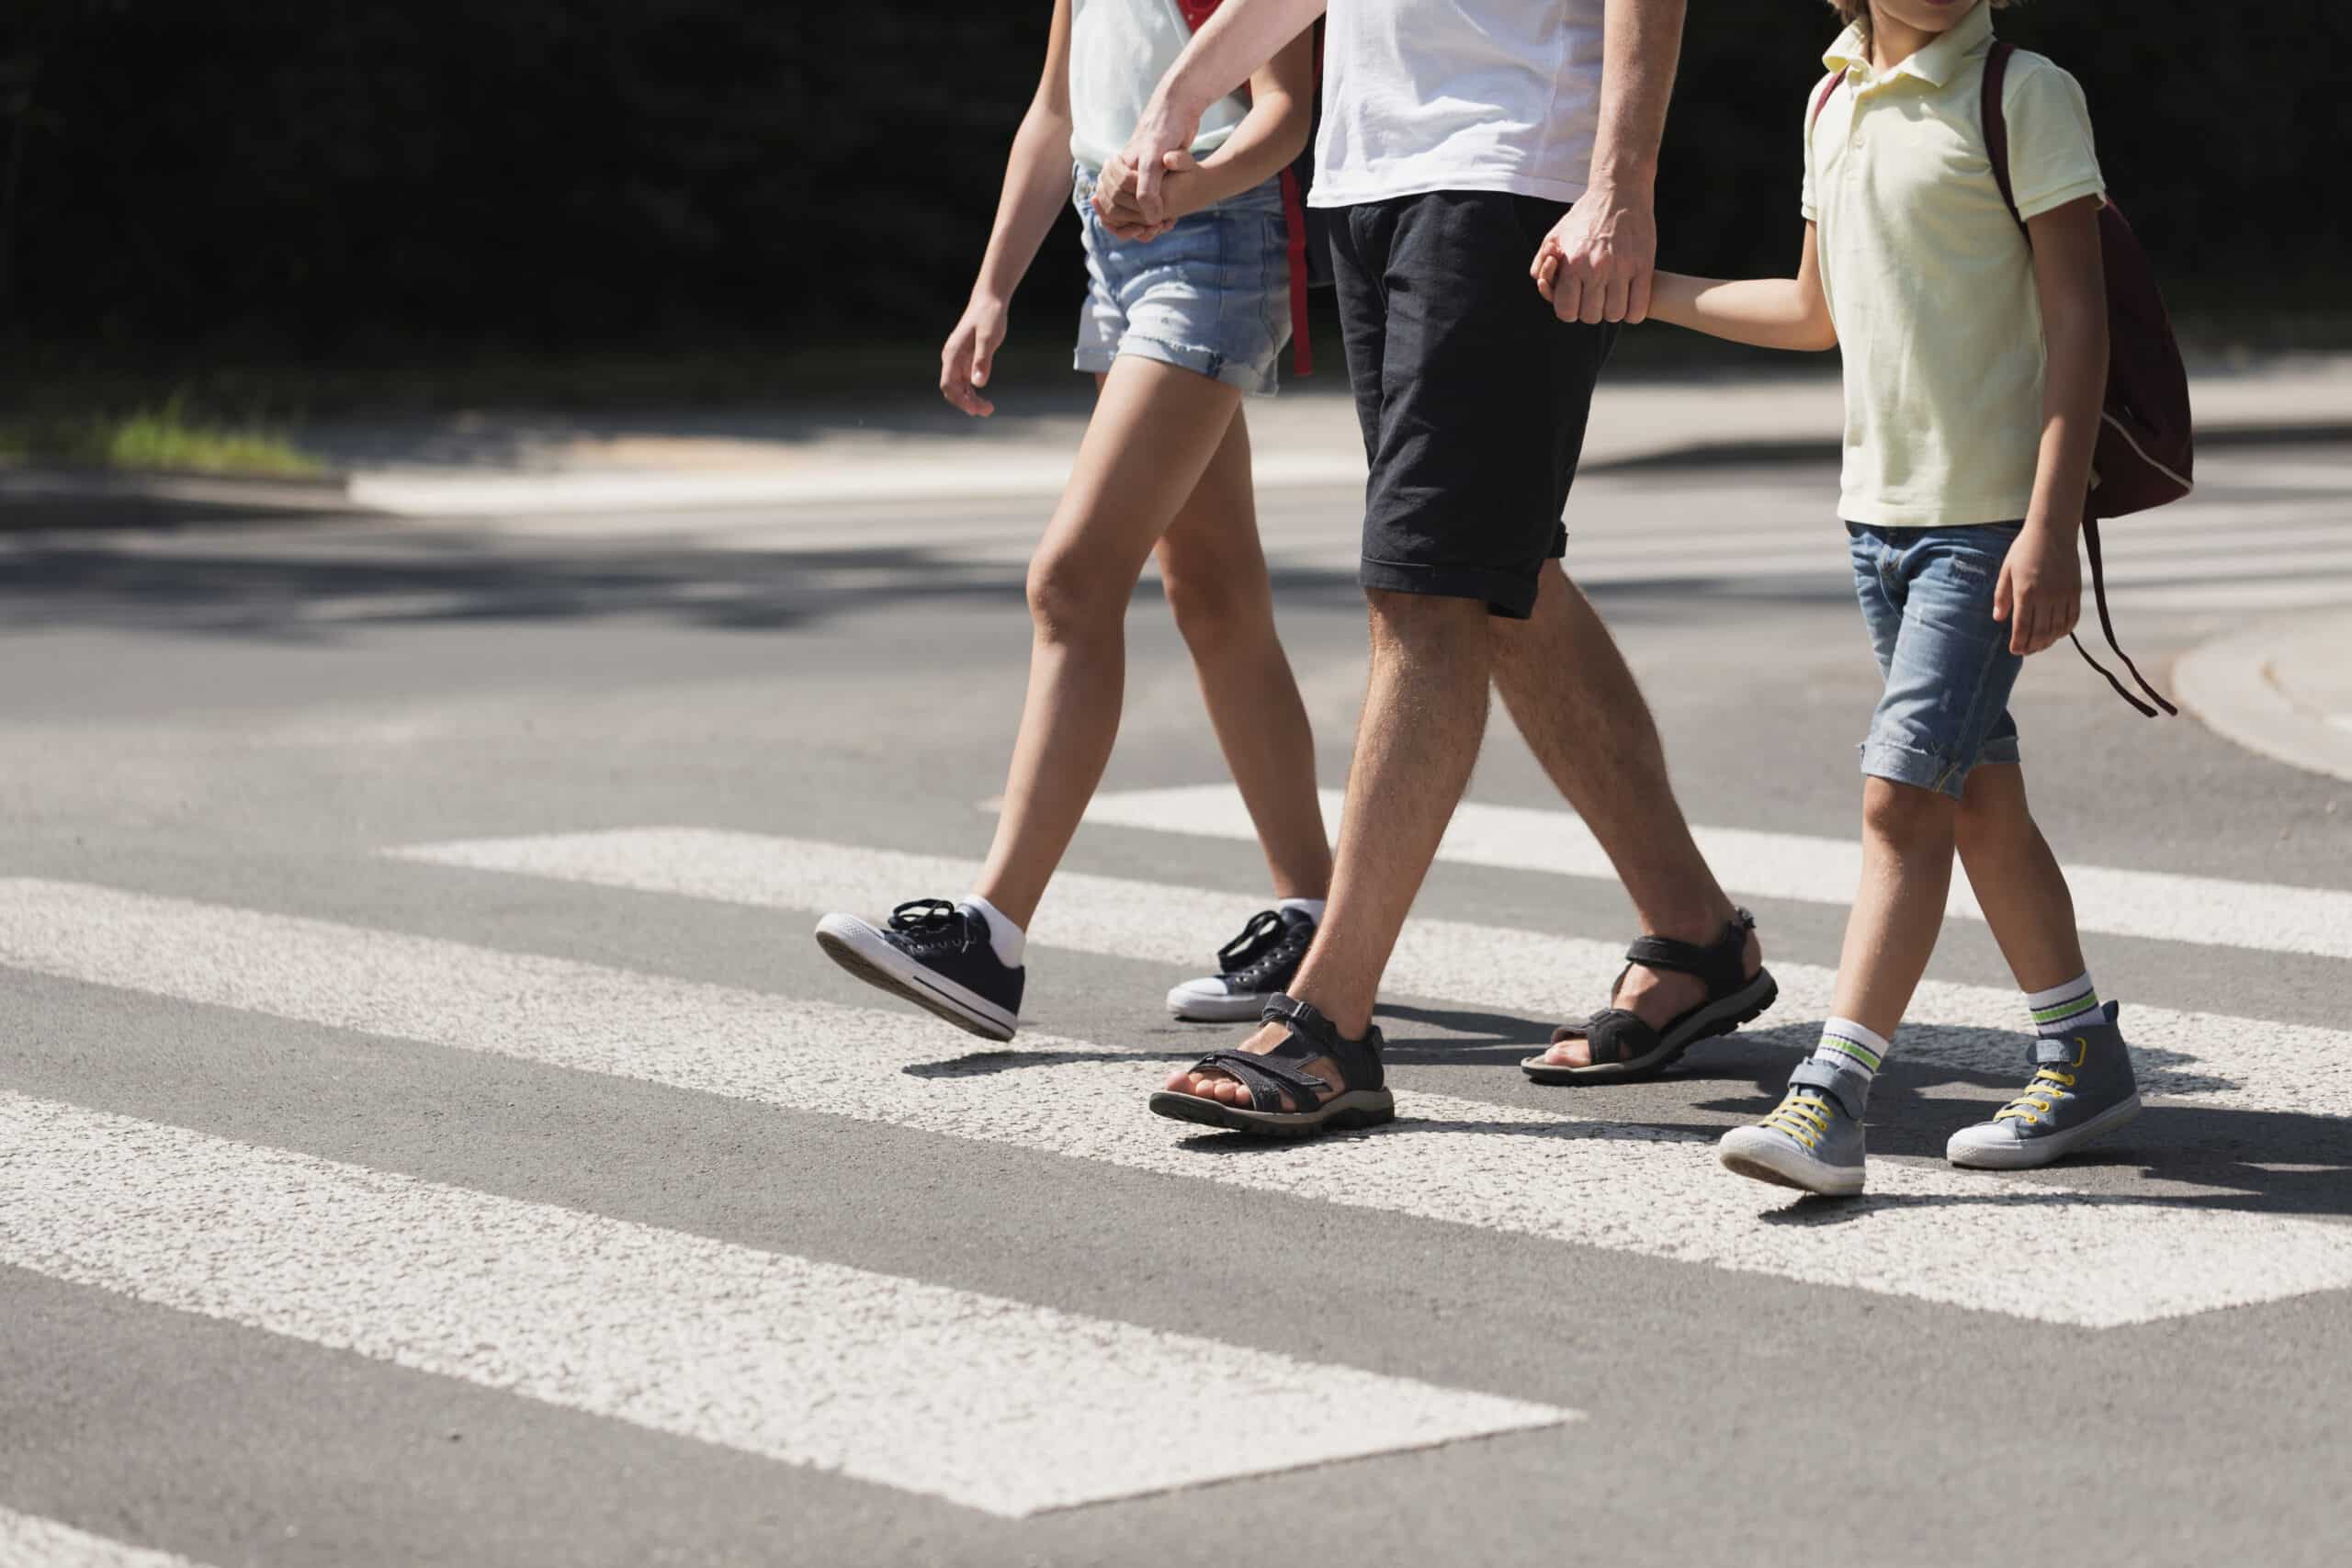 watch-your-step-safety-tips-every-pedestrian-should-know